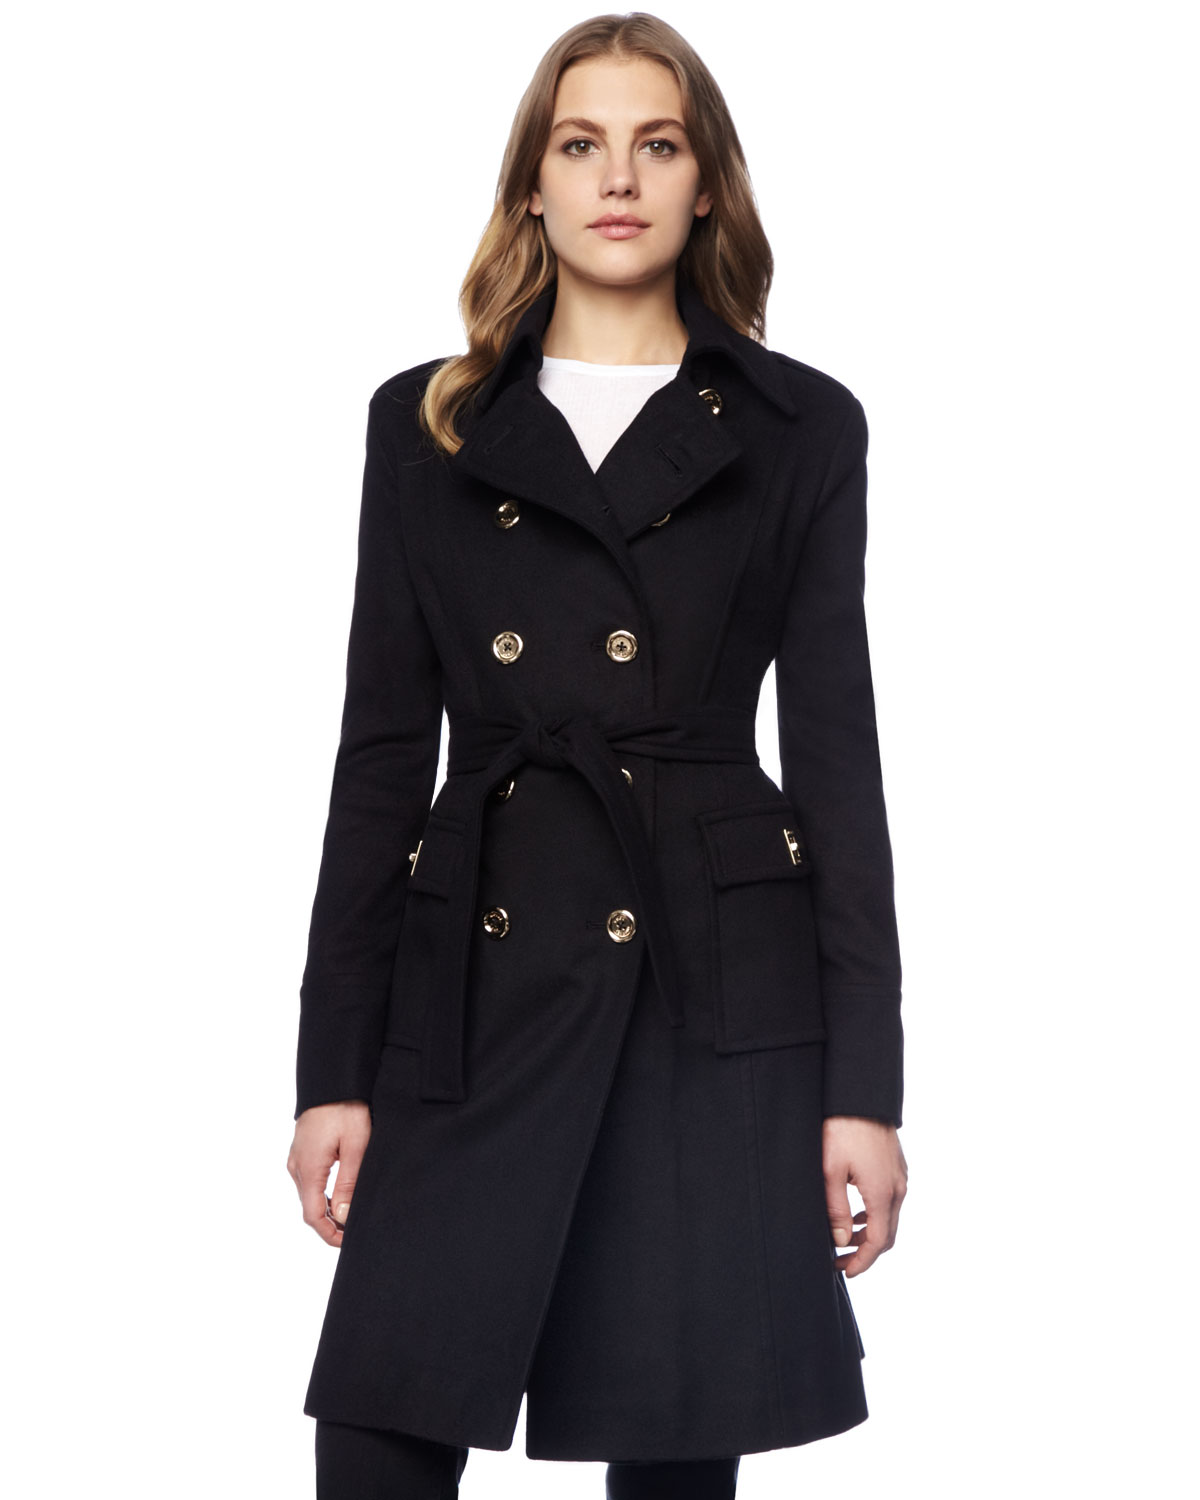 Lyst - Michael kors Beverly Doublebreasted Belted Coat in Black